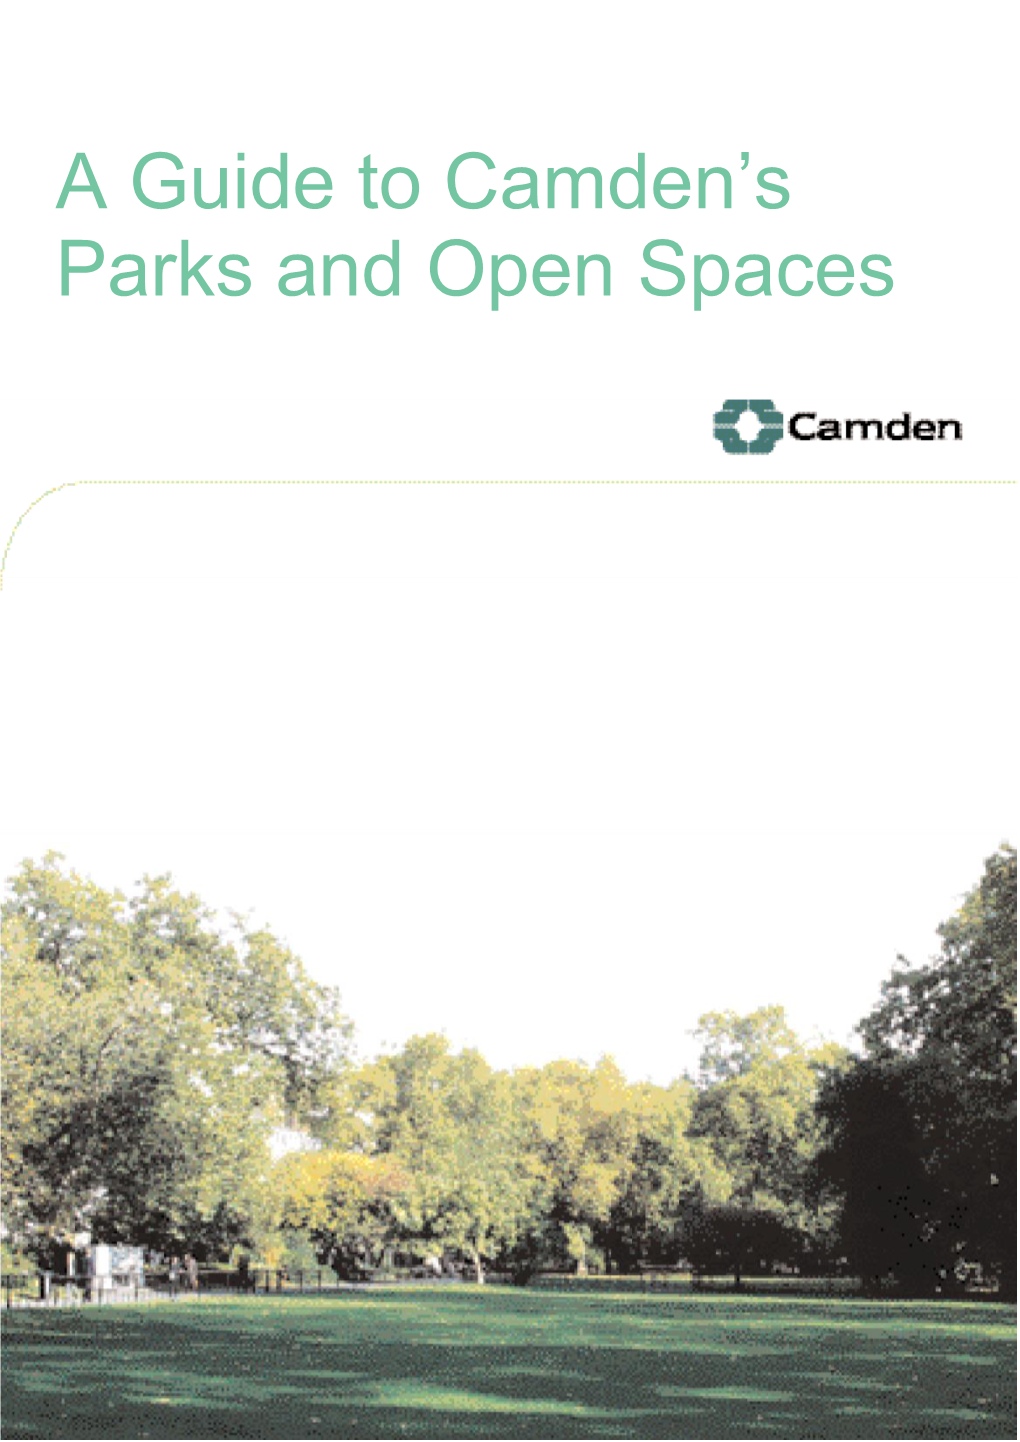 A Guide to Camden's Parks and Open Spaces